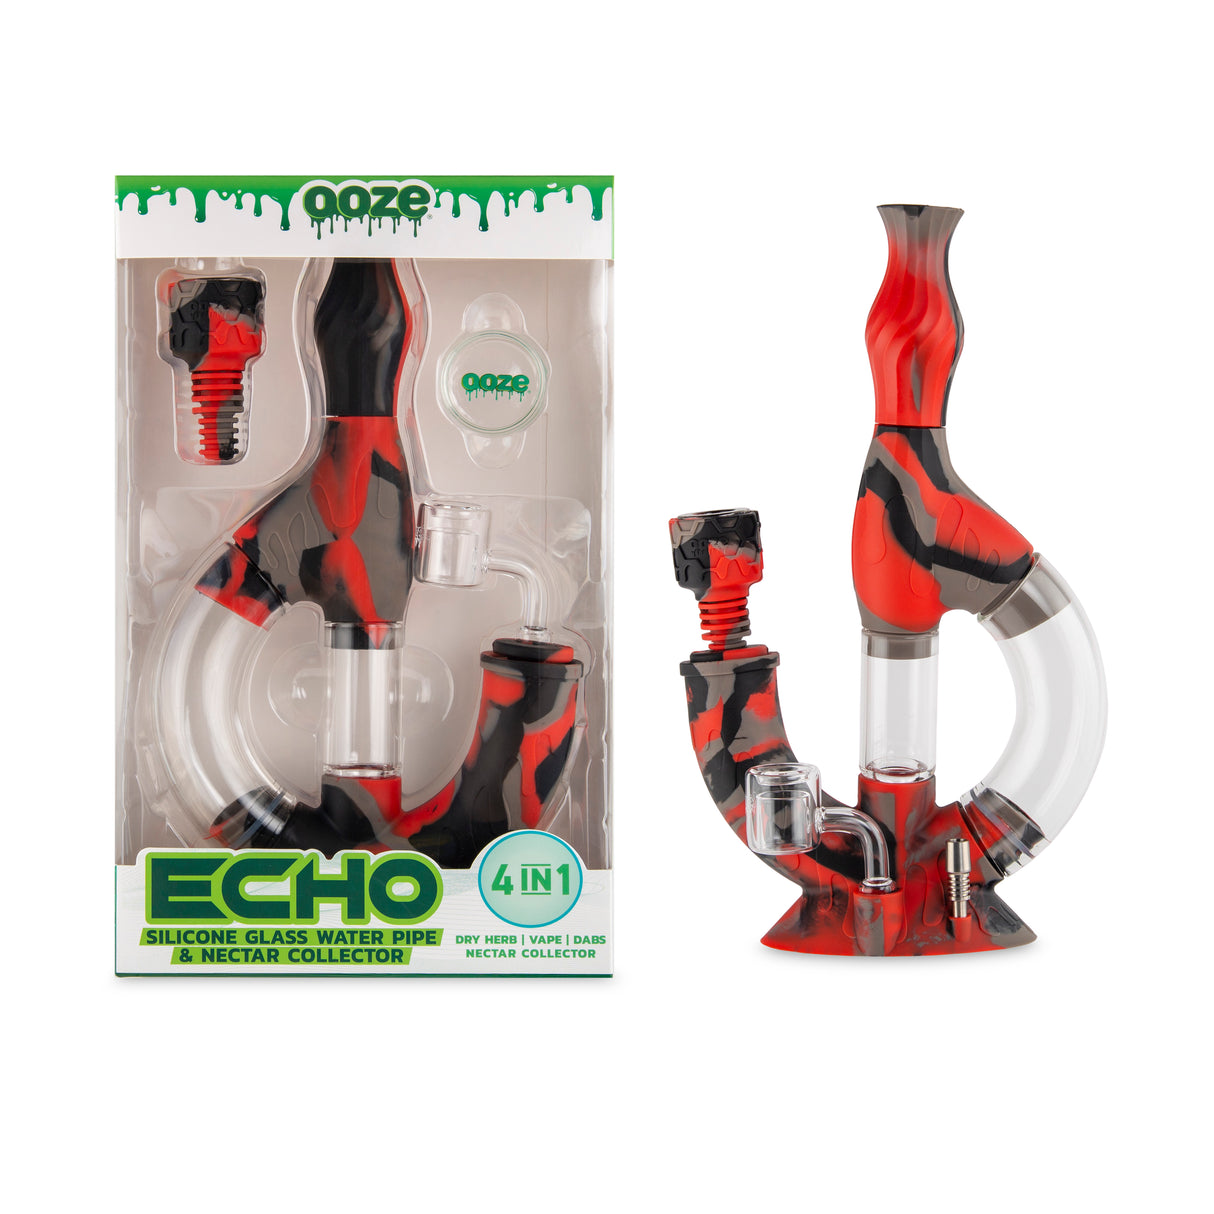 Ooze Echo Silicone Water Pipe, Dab Rig & Dab Straw - After Midnight